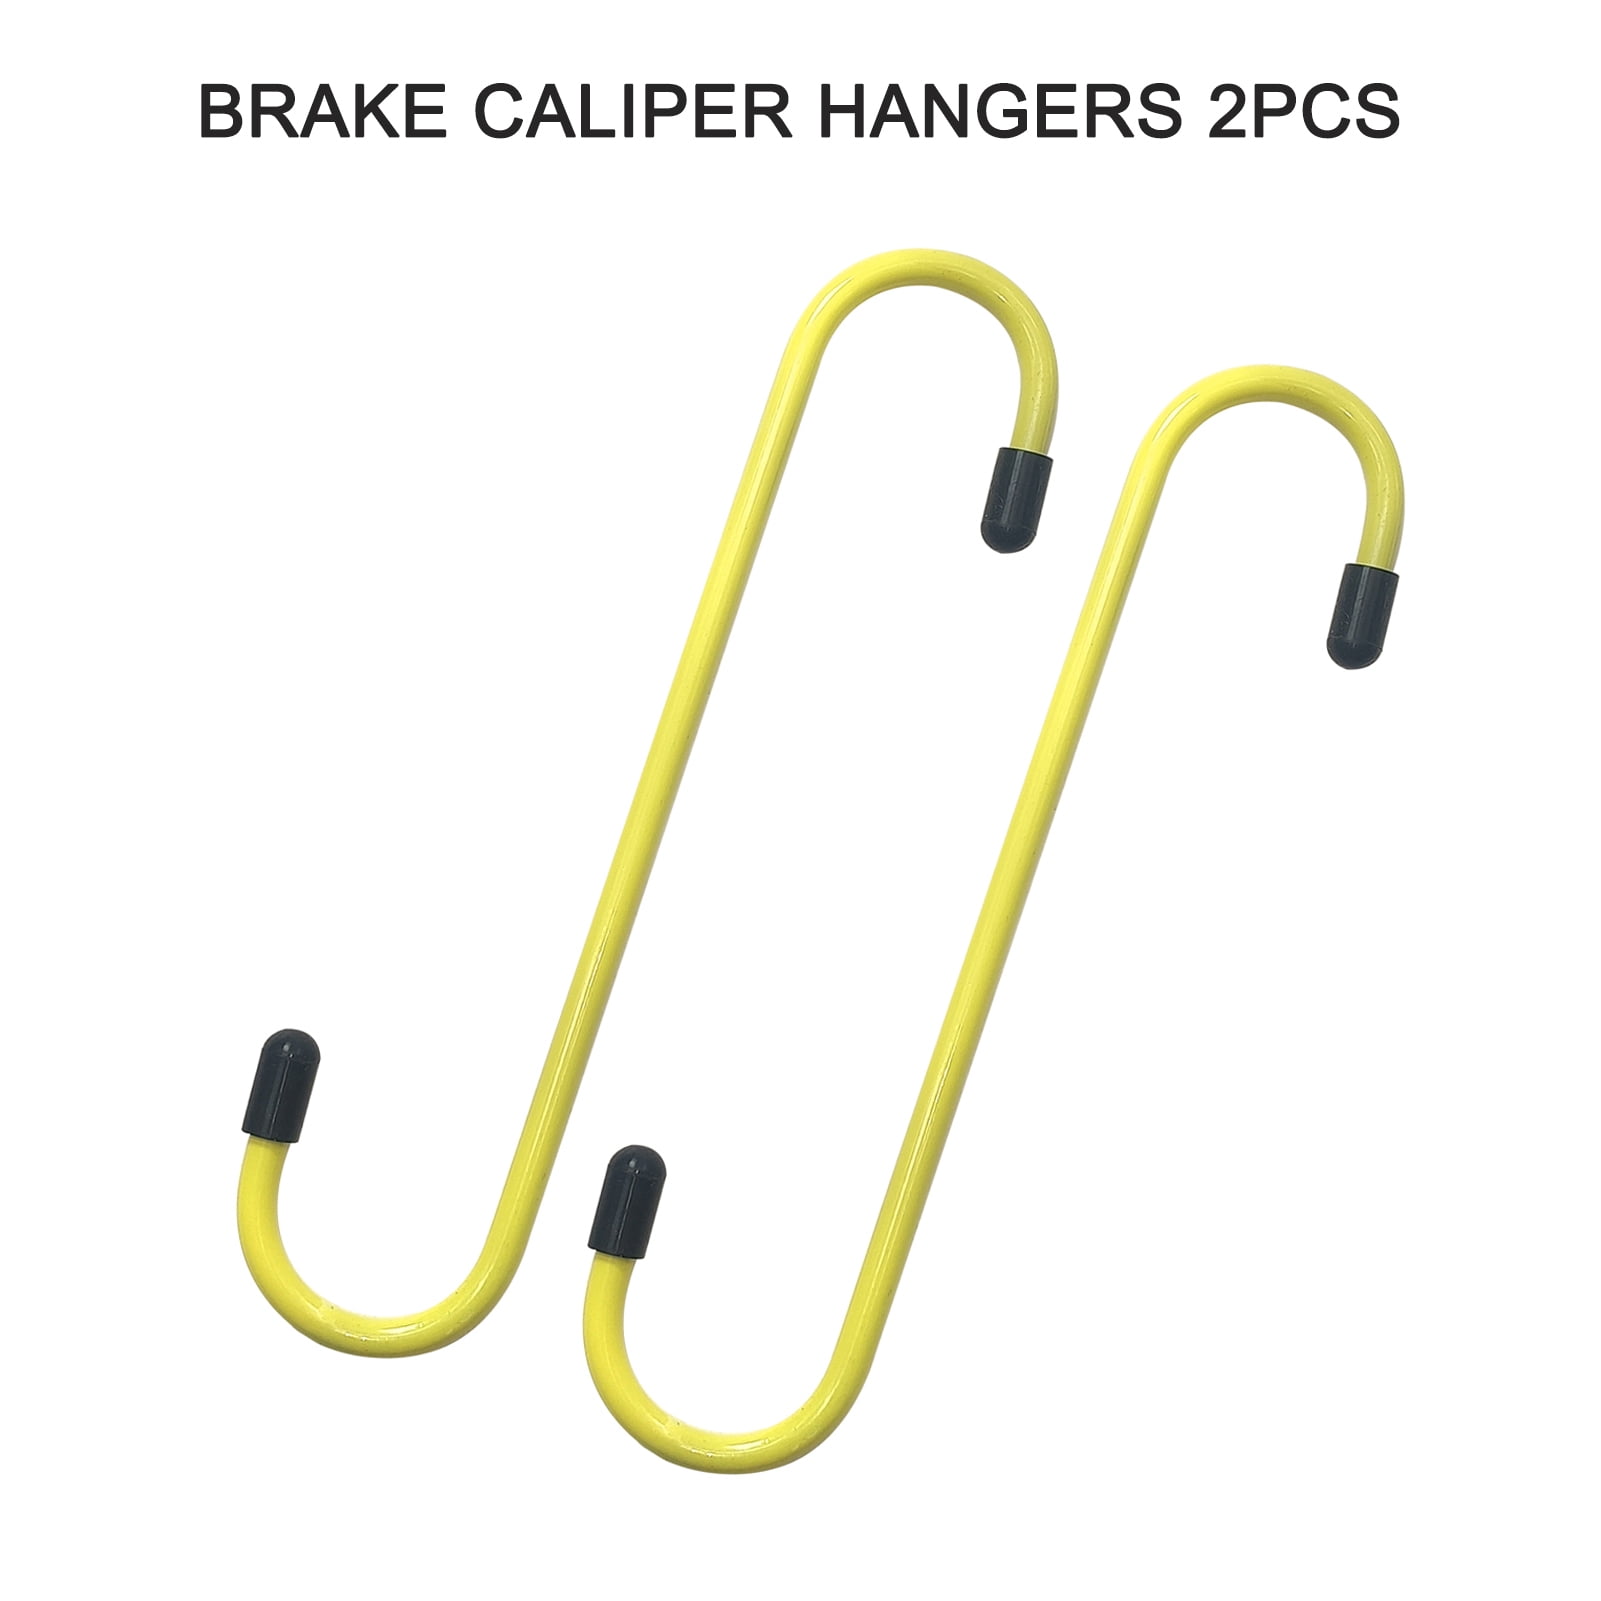 Axle and Suspension Work Bearing Bac-kitchen 8 Pcs Brake Caliper Hangers Brake Caliper Hooks with Rubber Tips Automotive Tool for Braking 